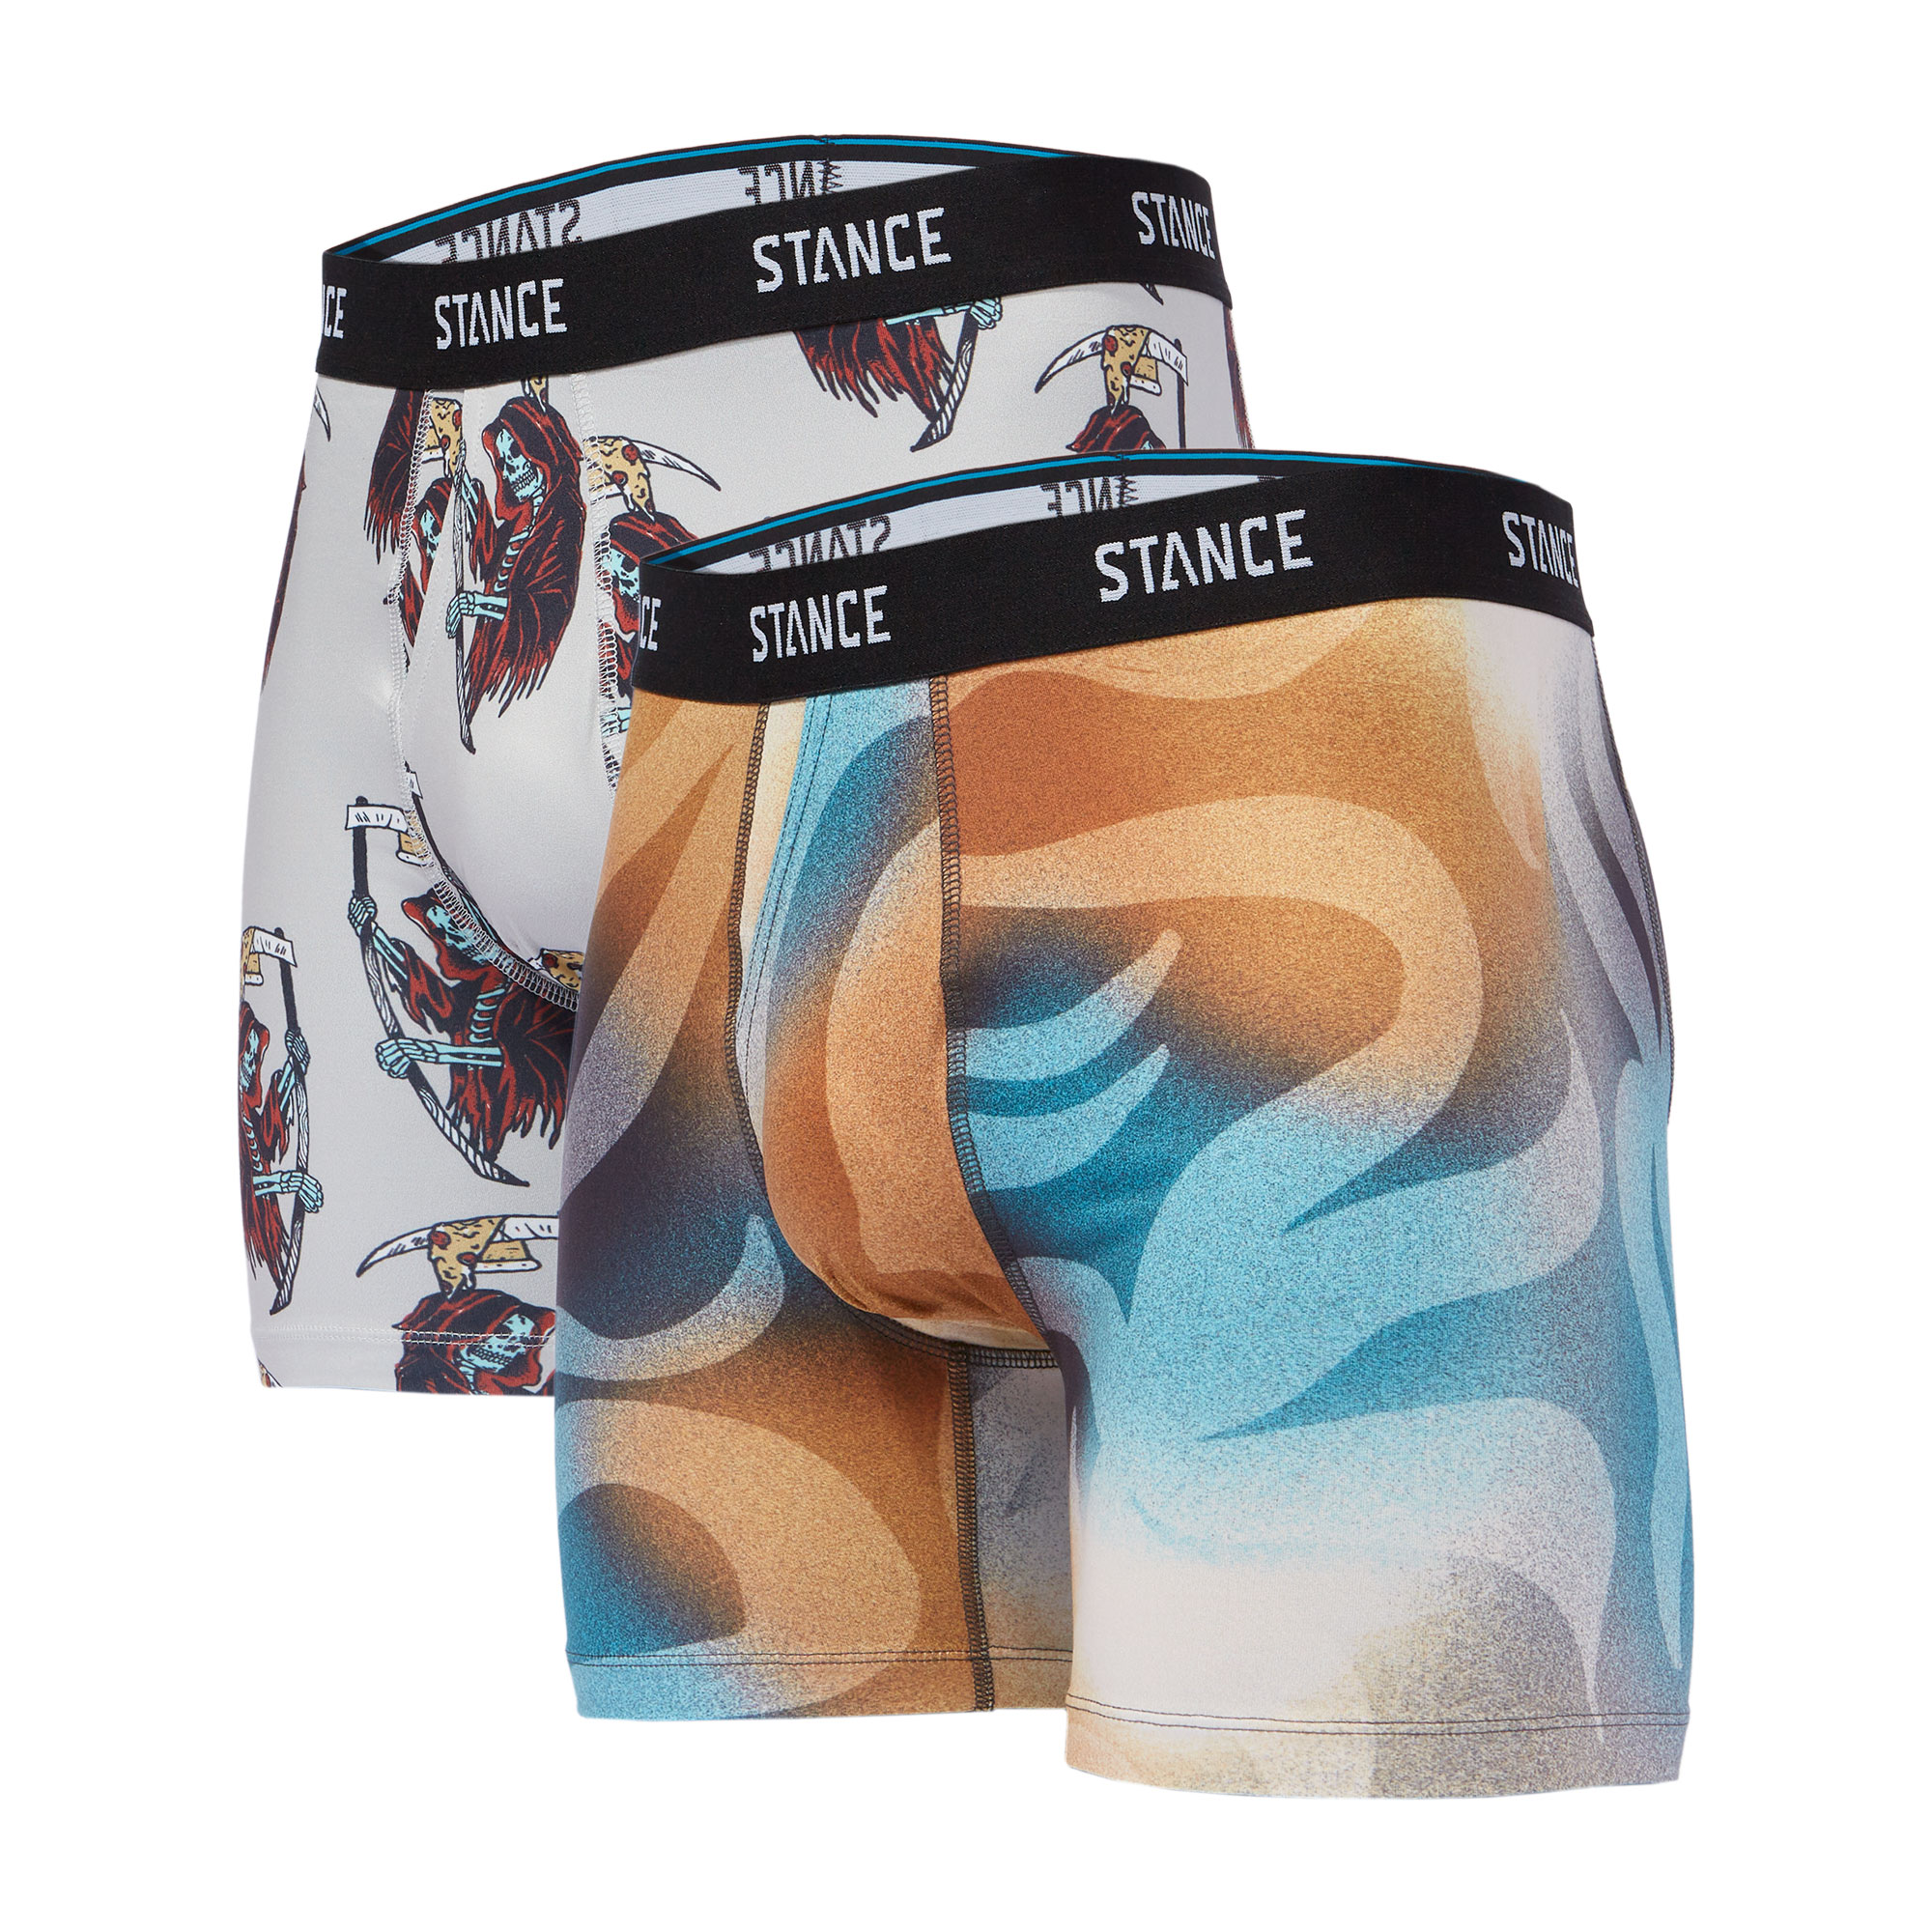 Stance Valiant Boxer Brief [2 Pack]